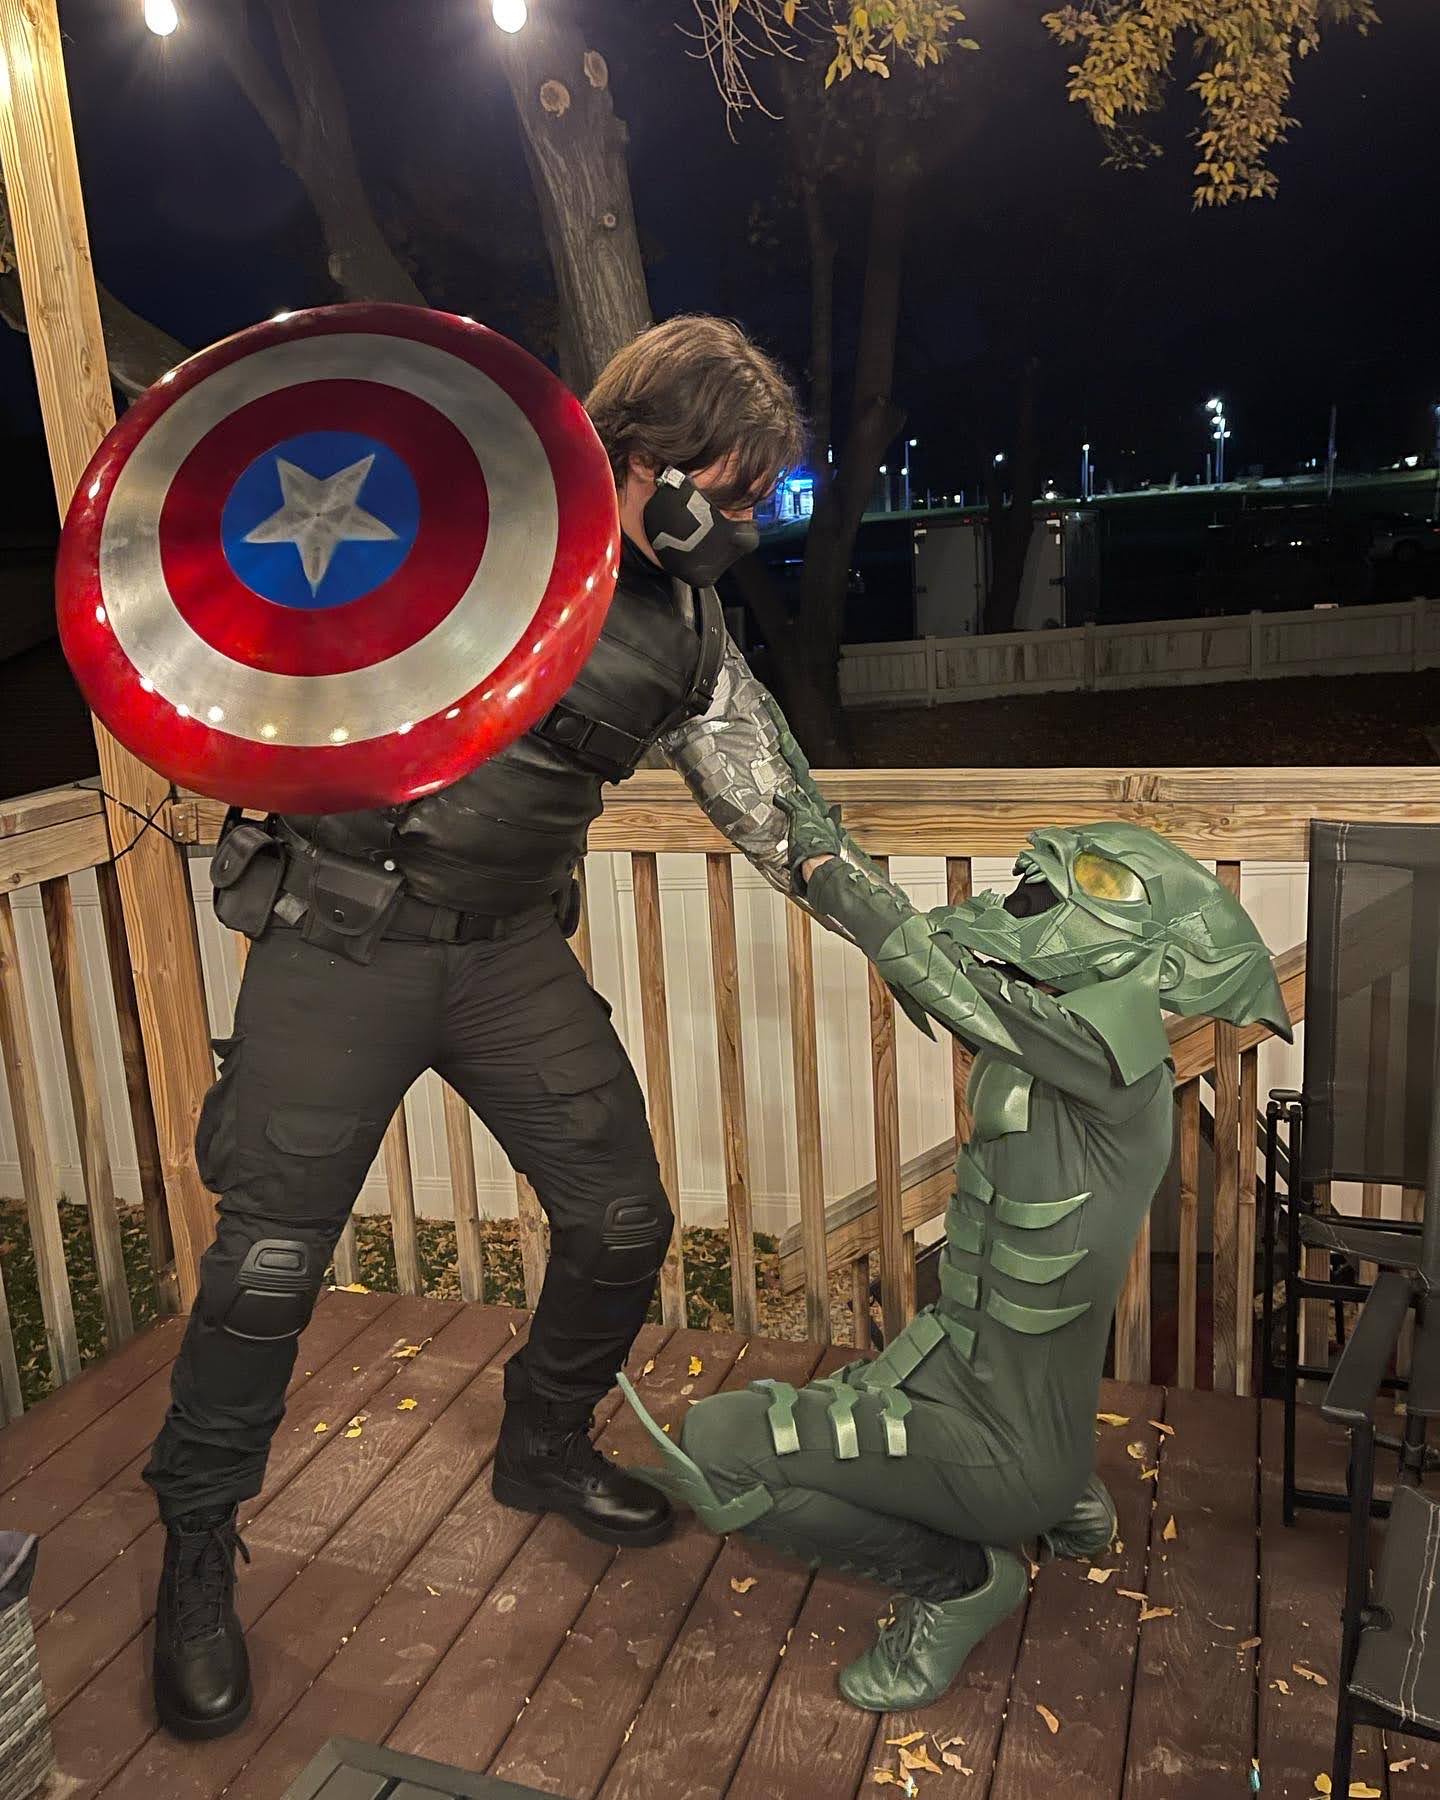 Stephen Dressed up as The Winter Soldier Fighting the Green Goblin